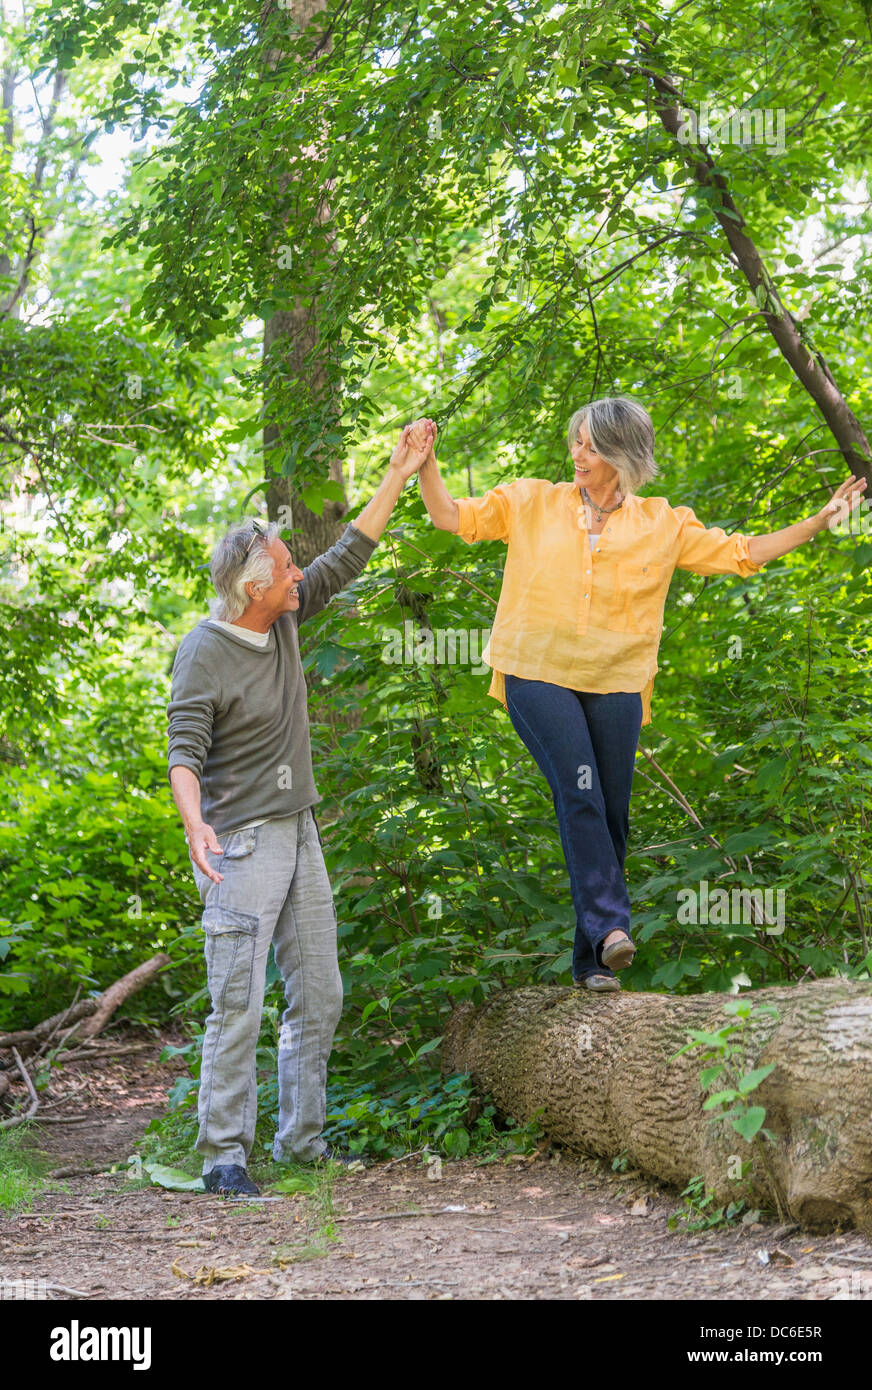 USA, New York State, New York, Central Park, Senior couple hiking in forest Banque D'Images